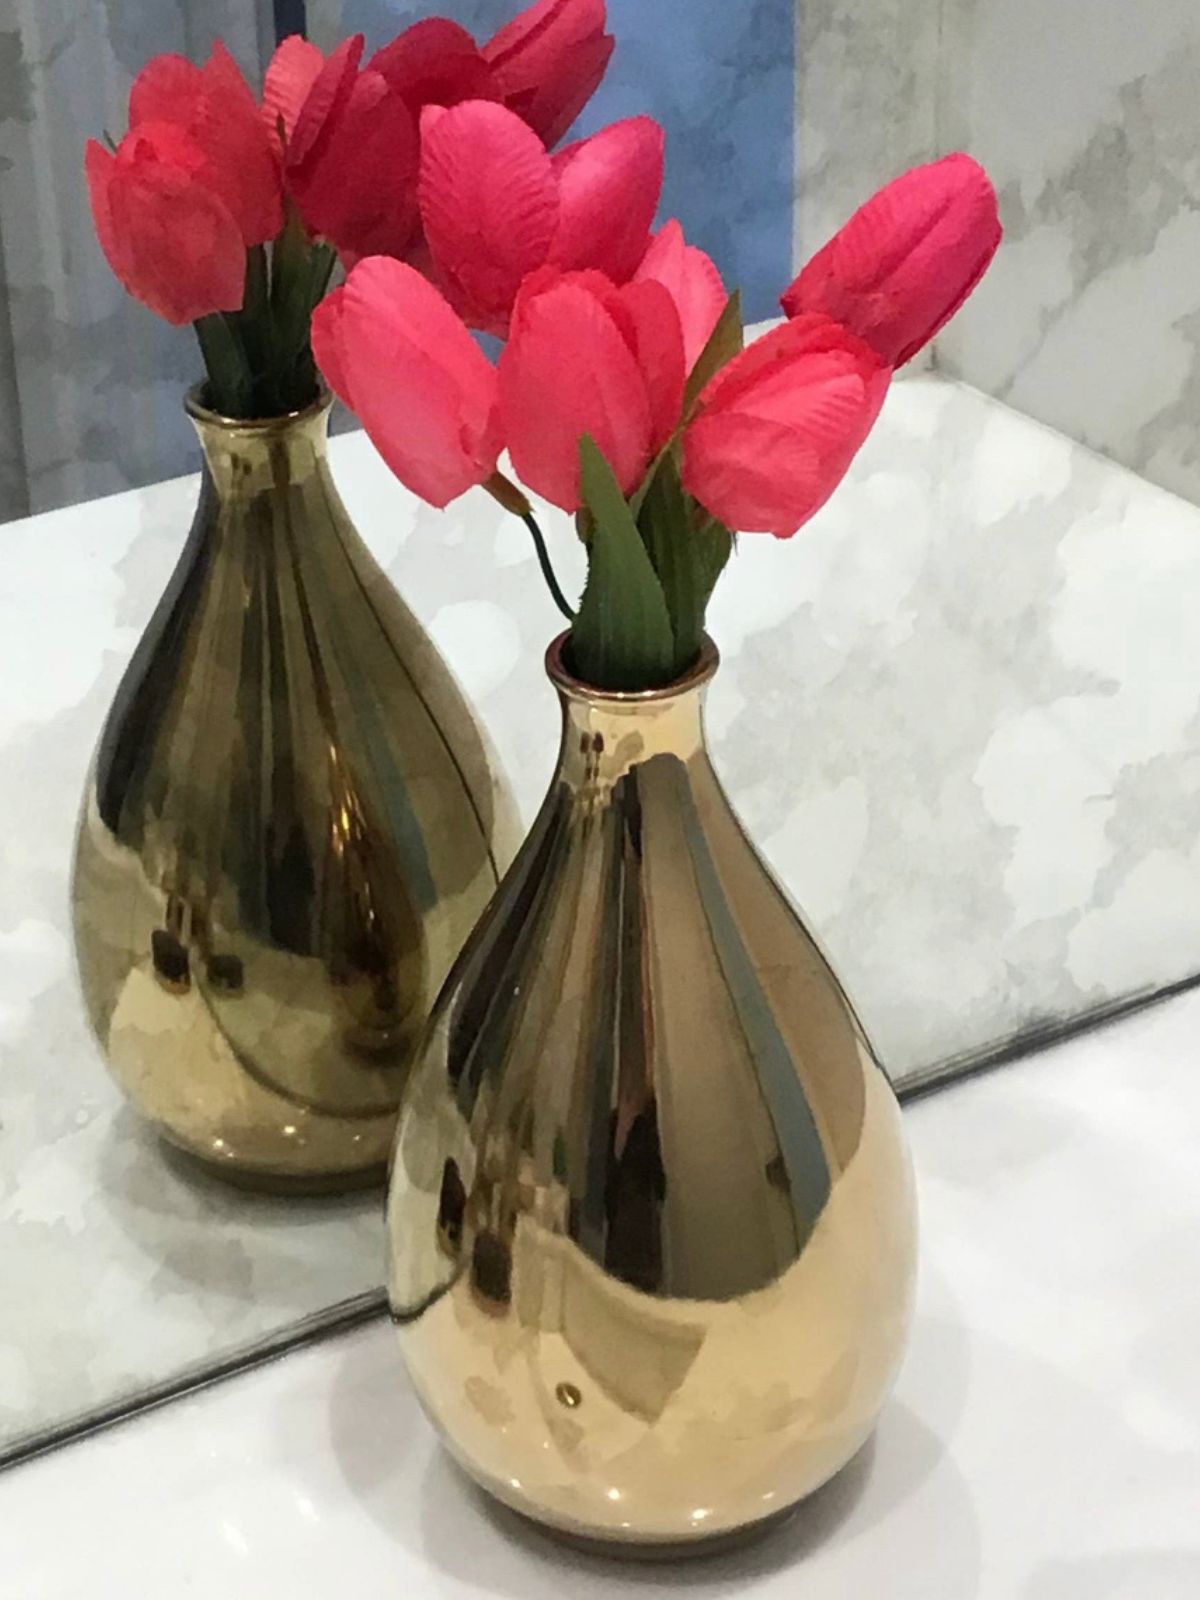 7H Gold Metallic Narrow Top Ceramic Vase with Pink Faux Flowers - KYA Home Decor 